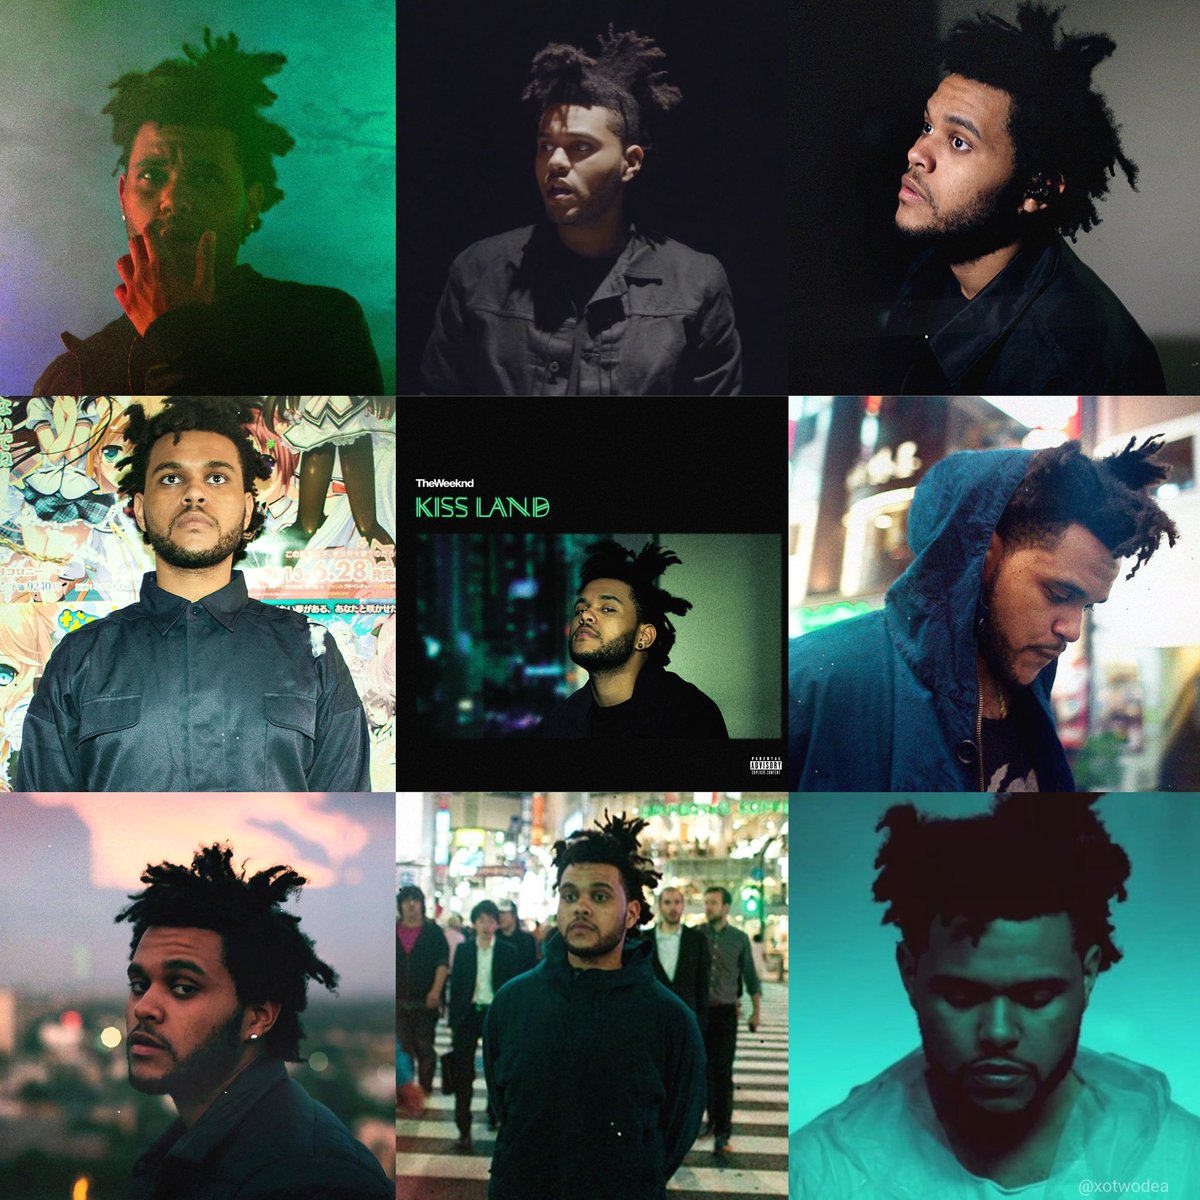 the weeknd's albums aesthetic.